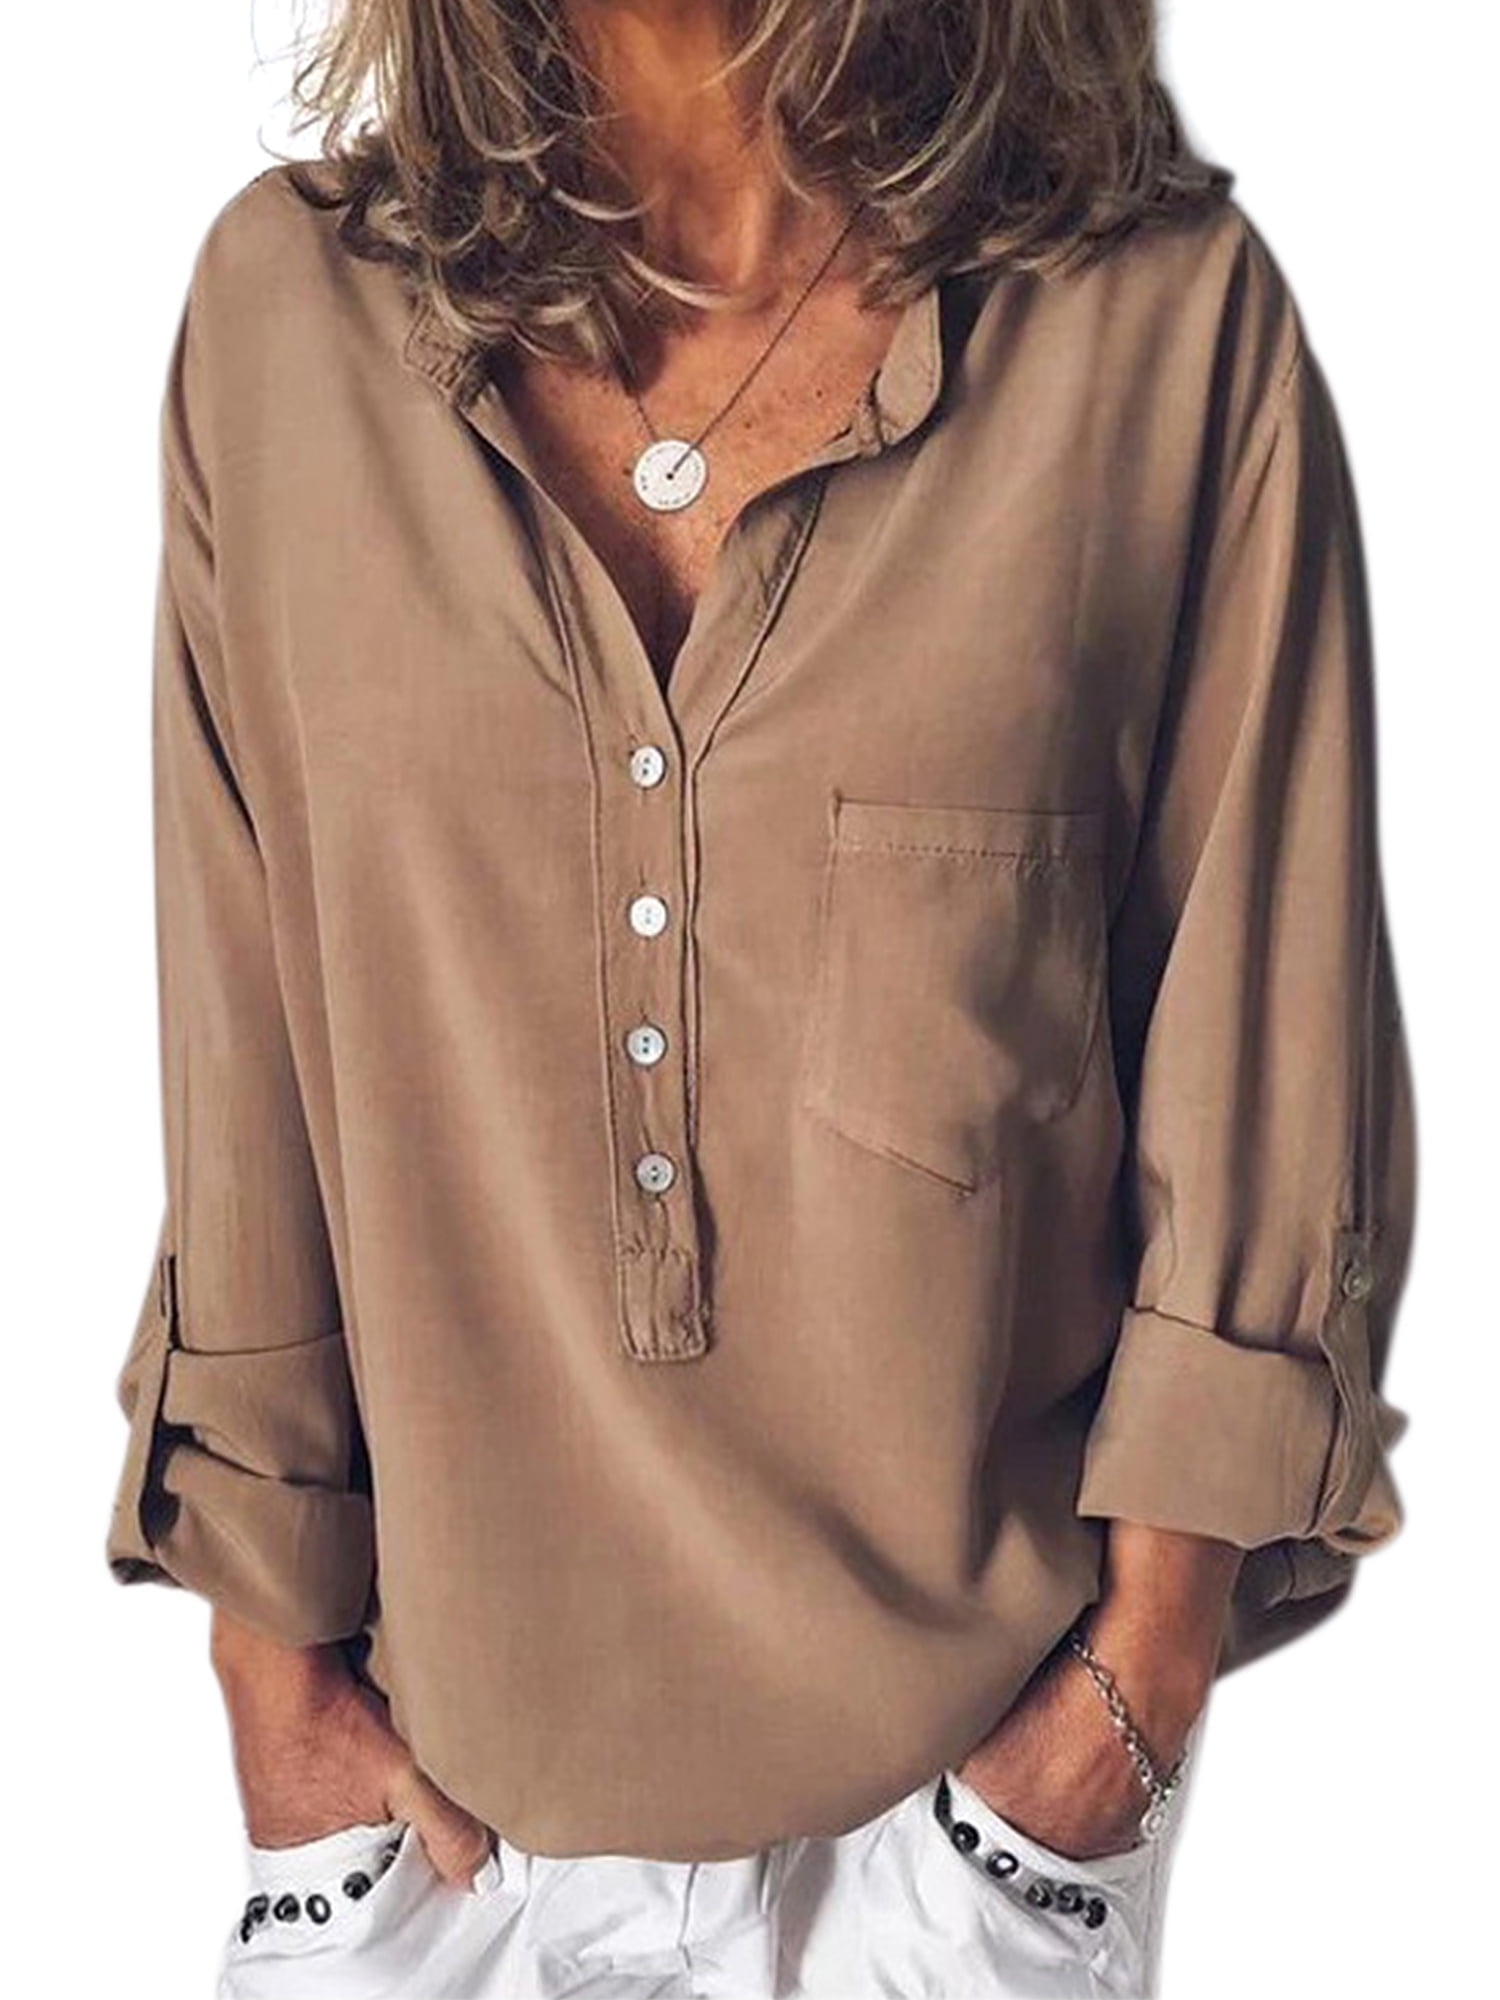 Womens Shirt T Shirt Summer Tops Long Sleeve Casual Fashion Solid Button Blouses